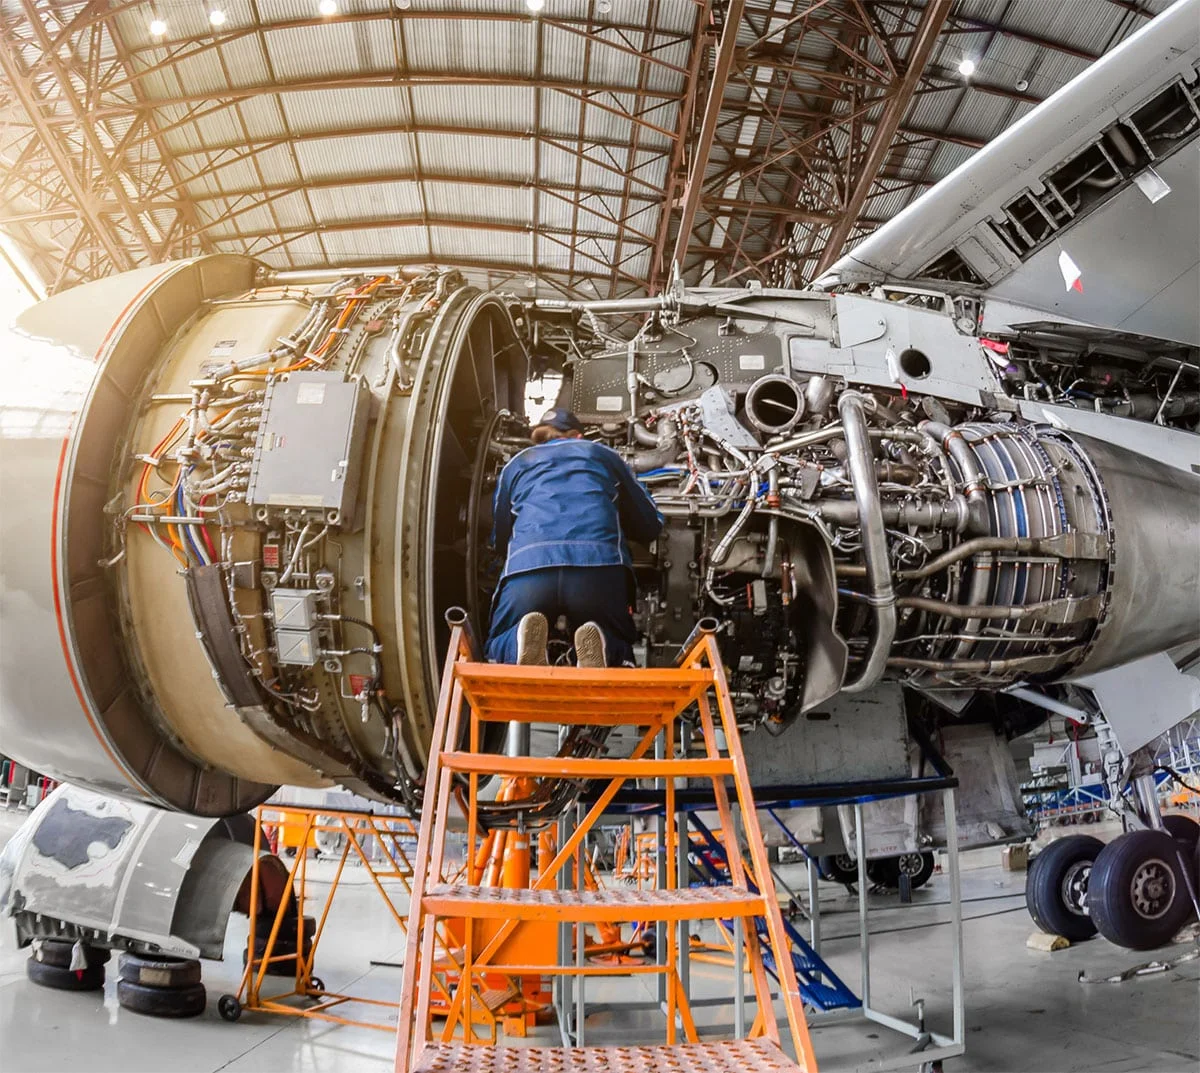 Medium shot of a mechanic working on a jet engine, in a hanger.